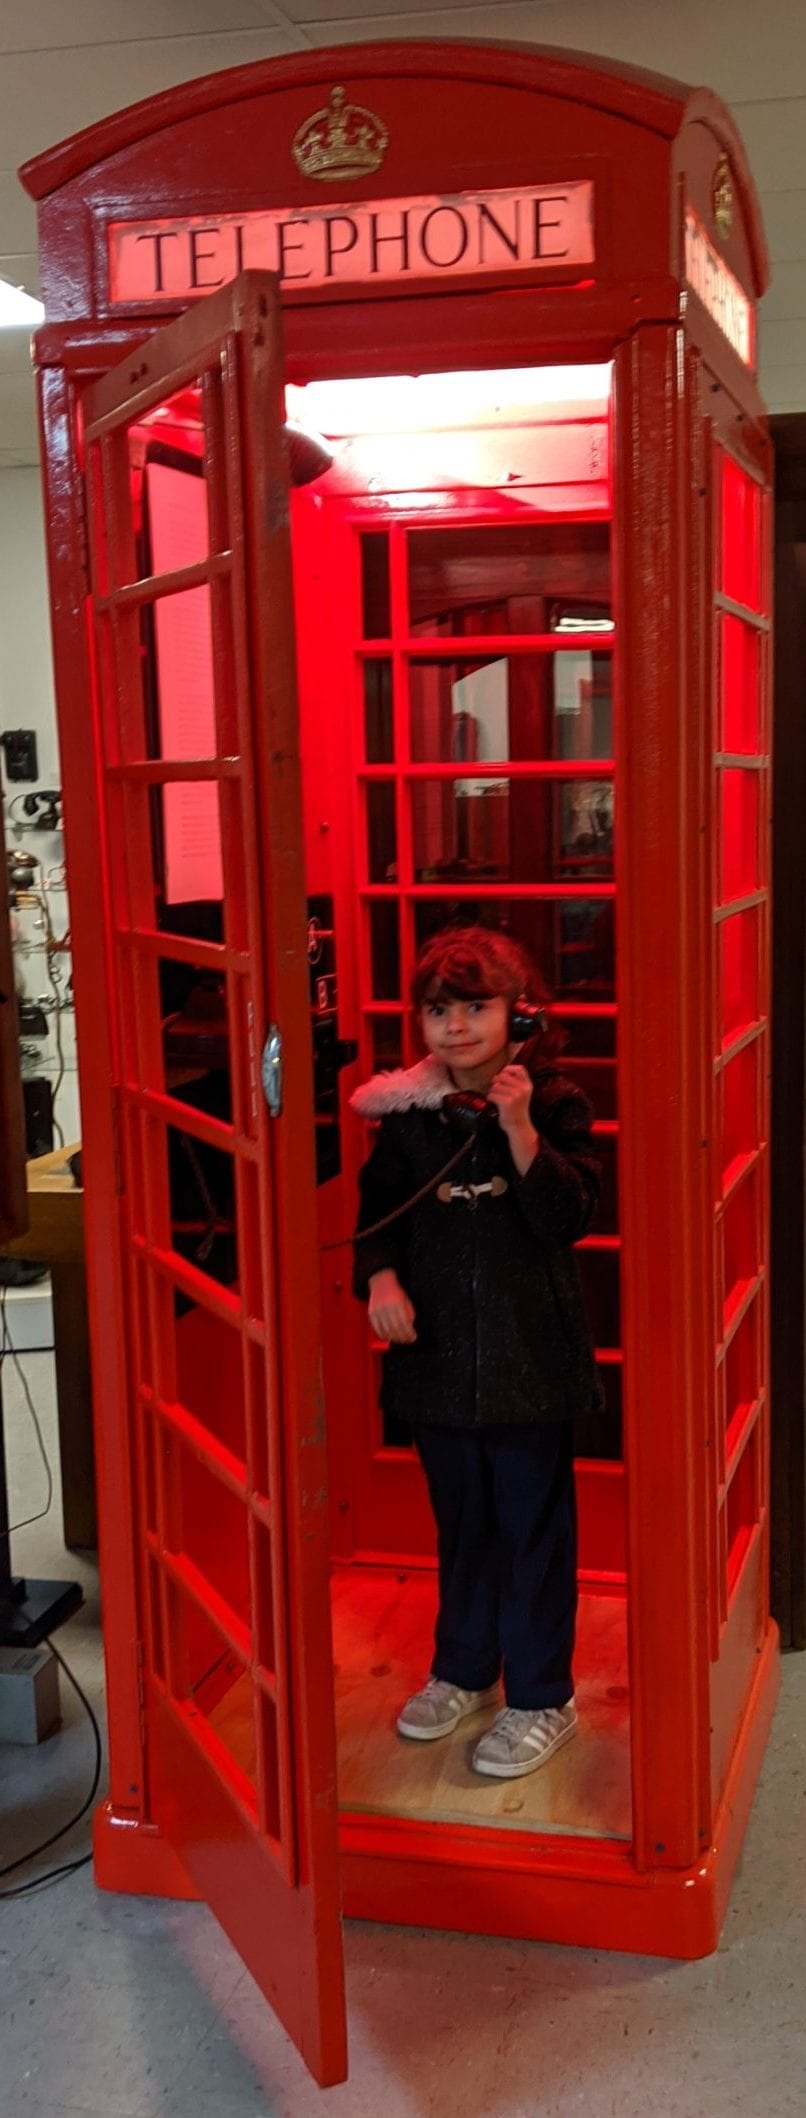 The K6 kiosk is Britain's Iconic Red Telephone Box designed by Sir Giles Gilbert Scott in 1935 to commemorate the Silver Jubilee of the coronation of King George V.